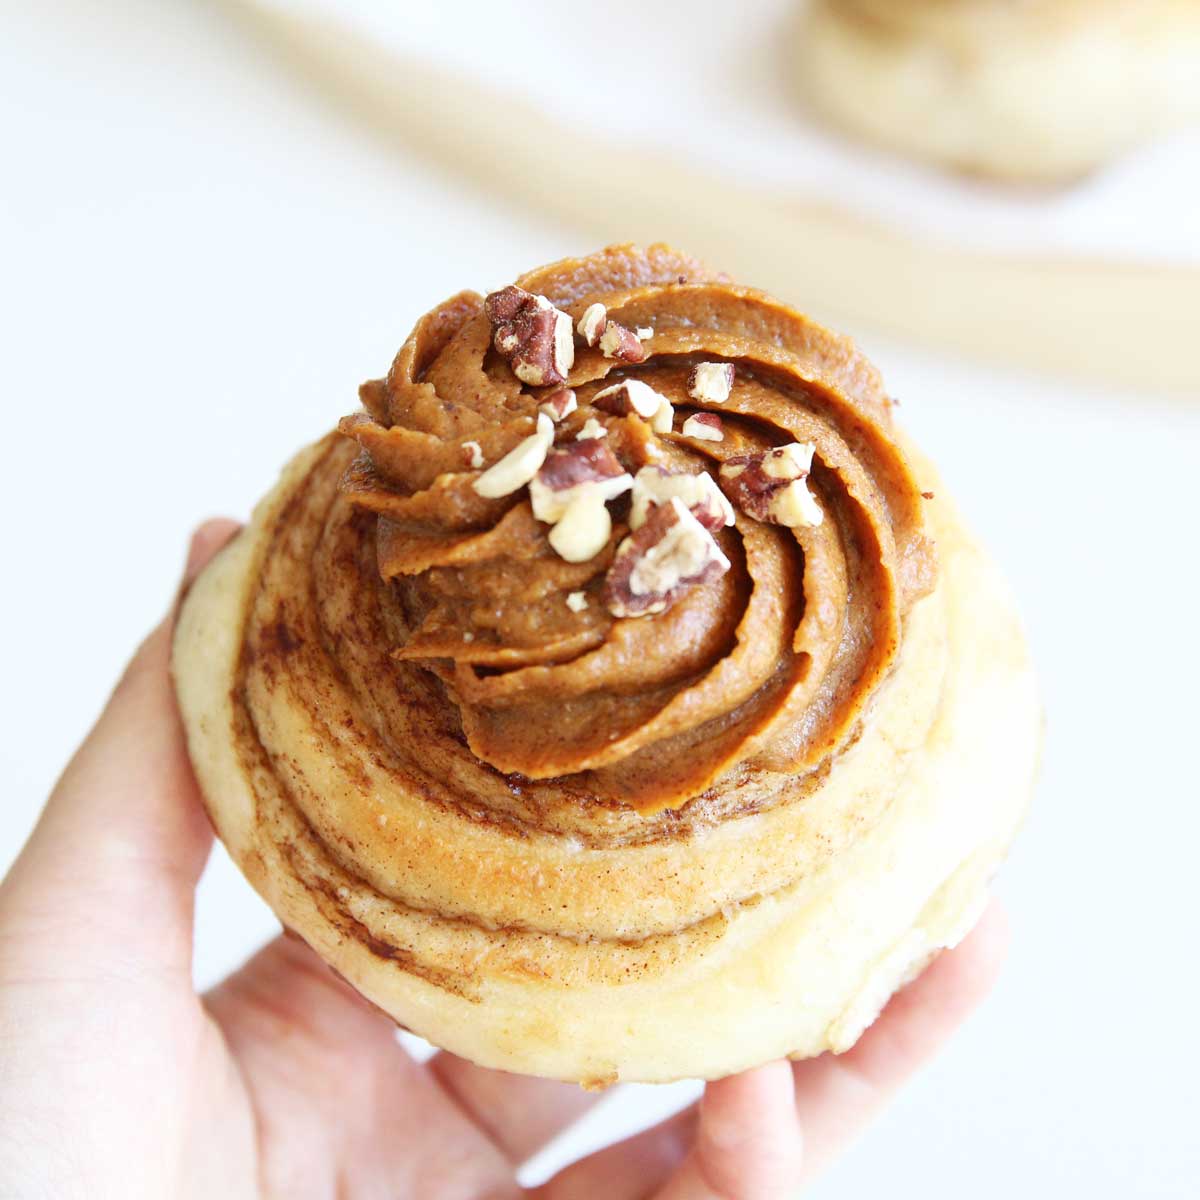 Healthy Vegan Almond Butter Frosting Made With Sweet Potatoes - Caramel Apple Dip